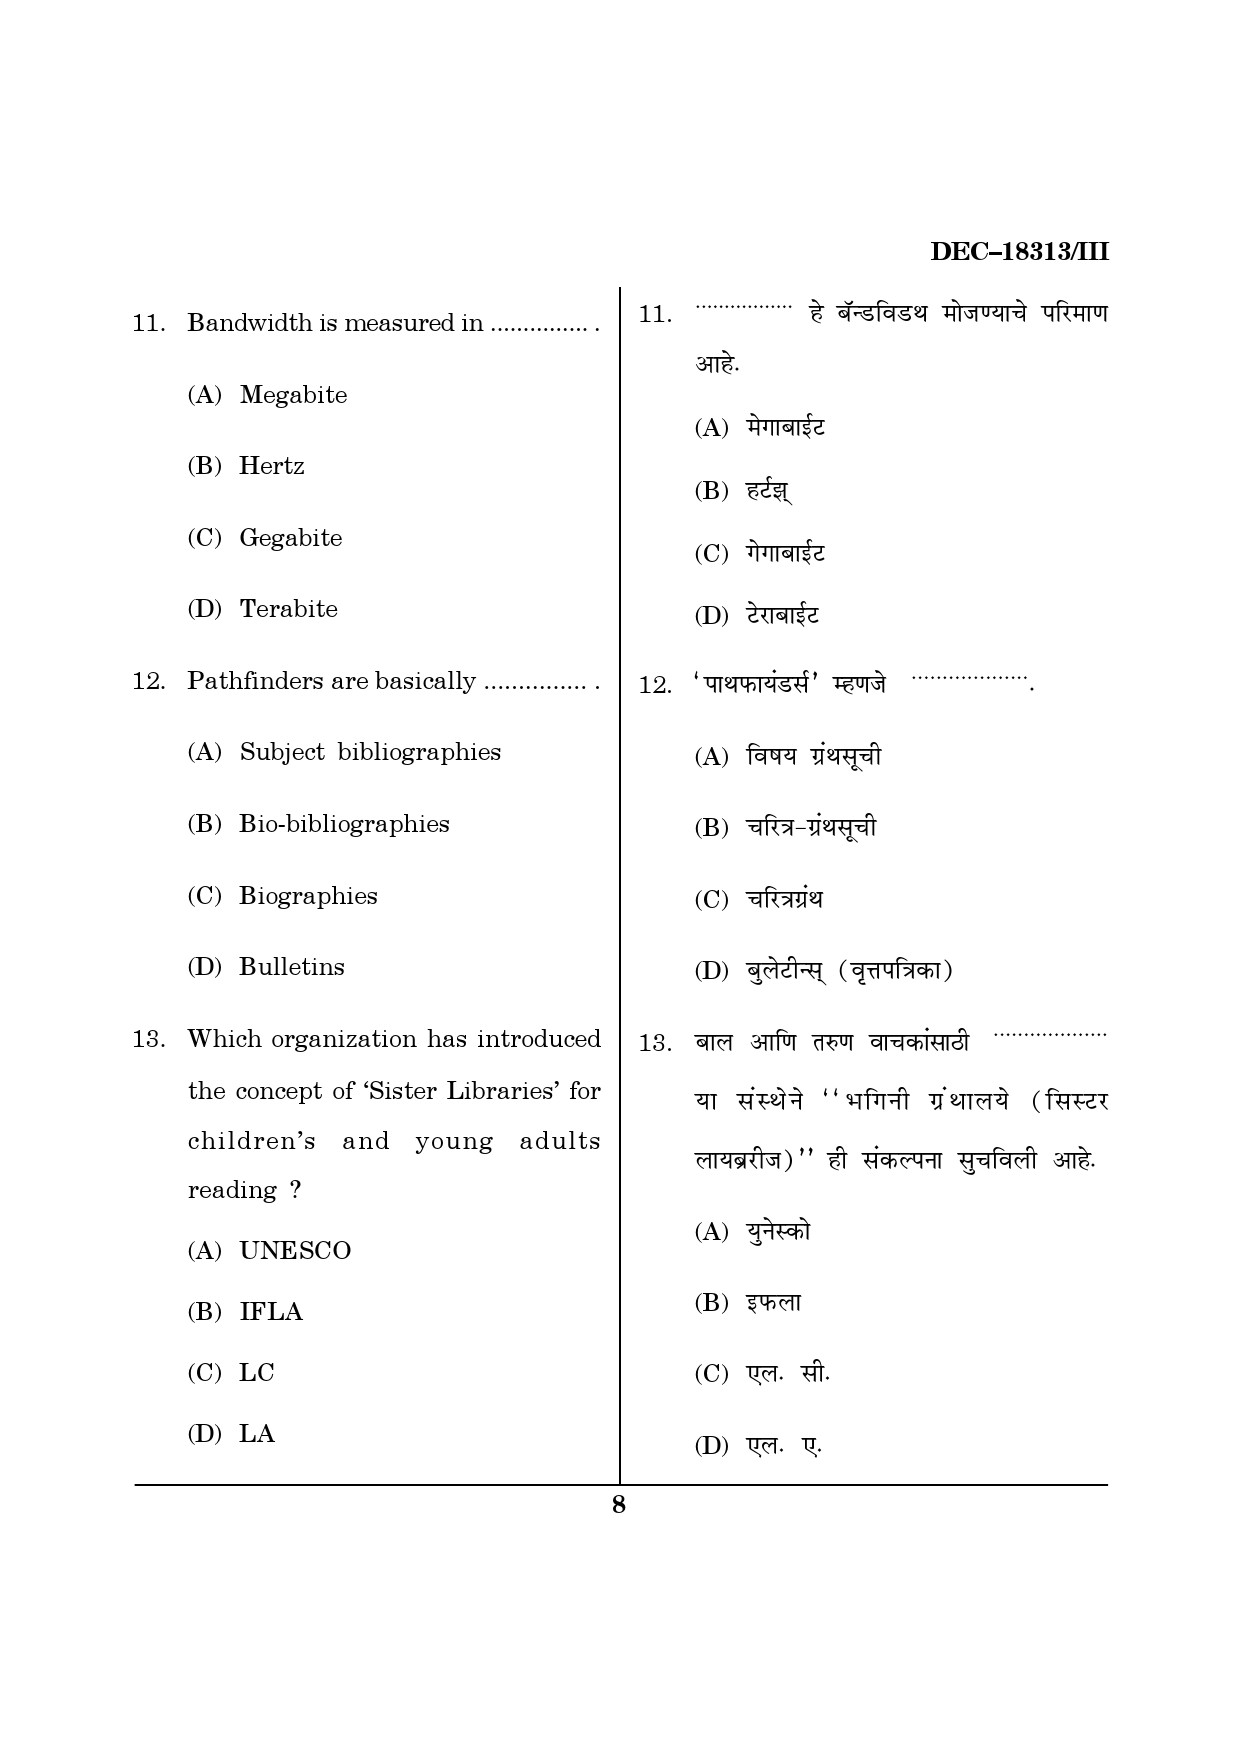 Maharashtra SET Library Information Science Question Paper III December 2013 7